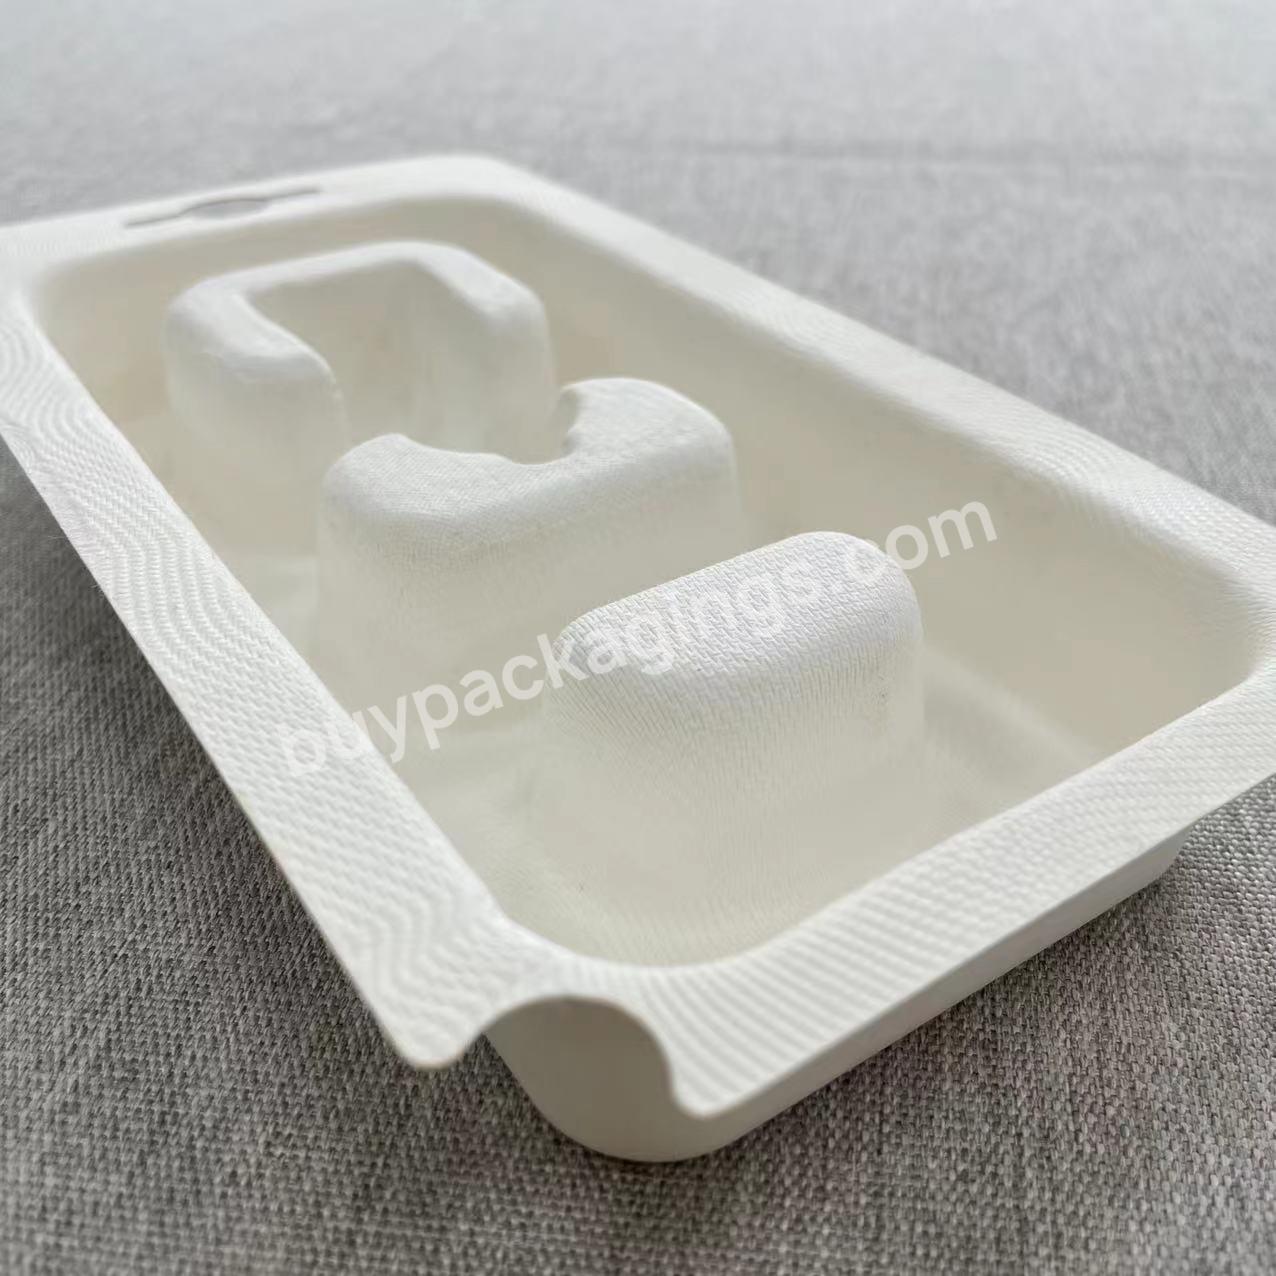 Biodegradable White Eco-friendly Cosmetics Essence Paper Molded Pulp Insert Products Packaging Box Inner Tray - Buy Products Packaging Tray,Biodegradable Molded Pulp Tray,Pulp Box Inner Tray.